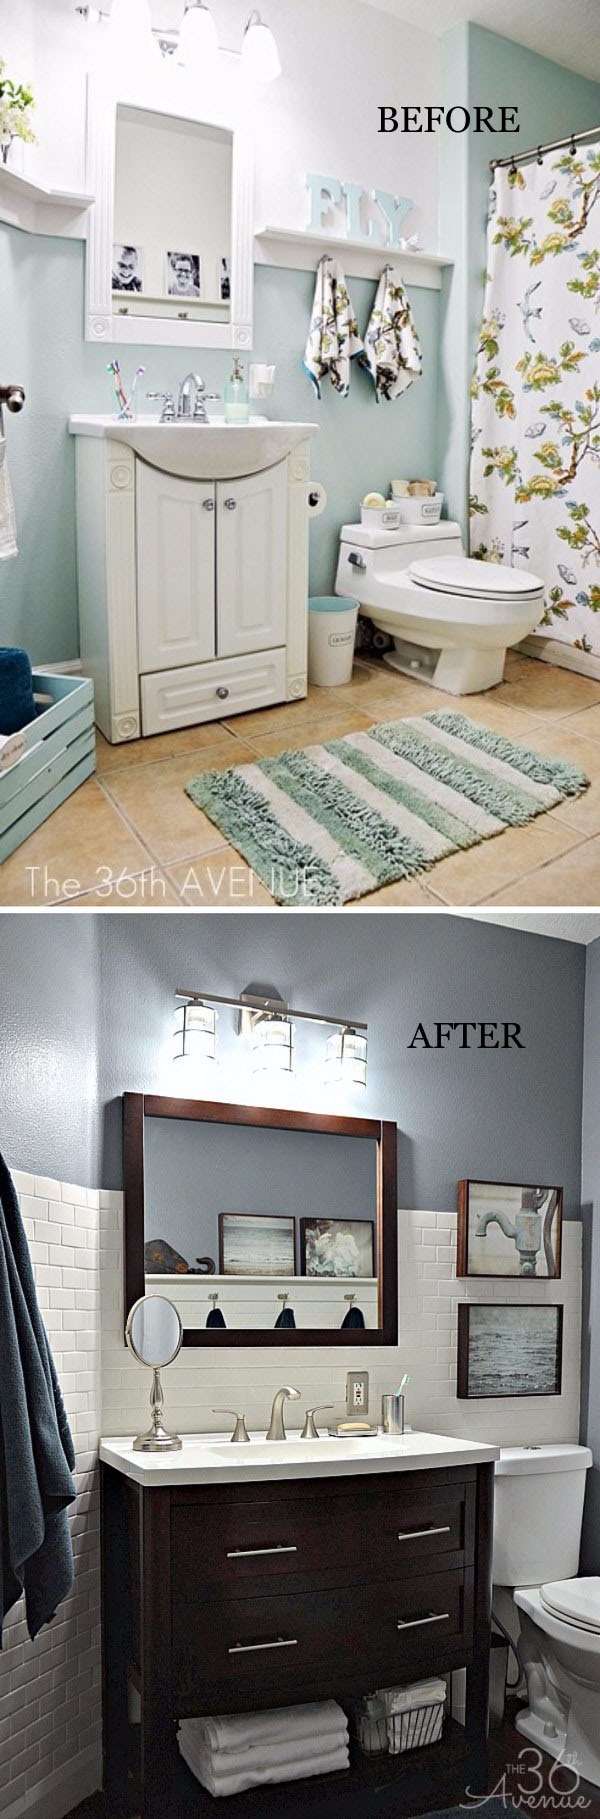 Modern bathroom makeover with metallic accents, dark furniture and white subway tiles. 